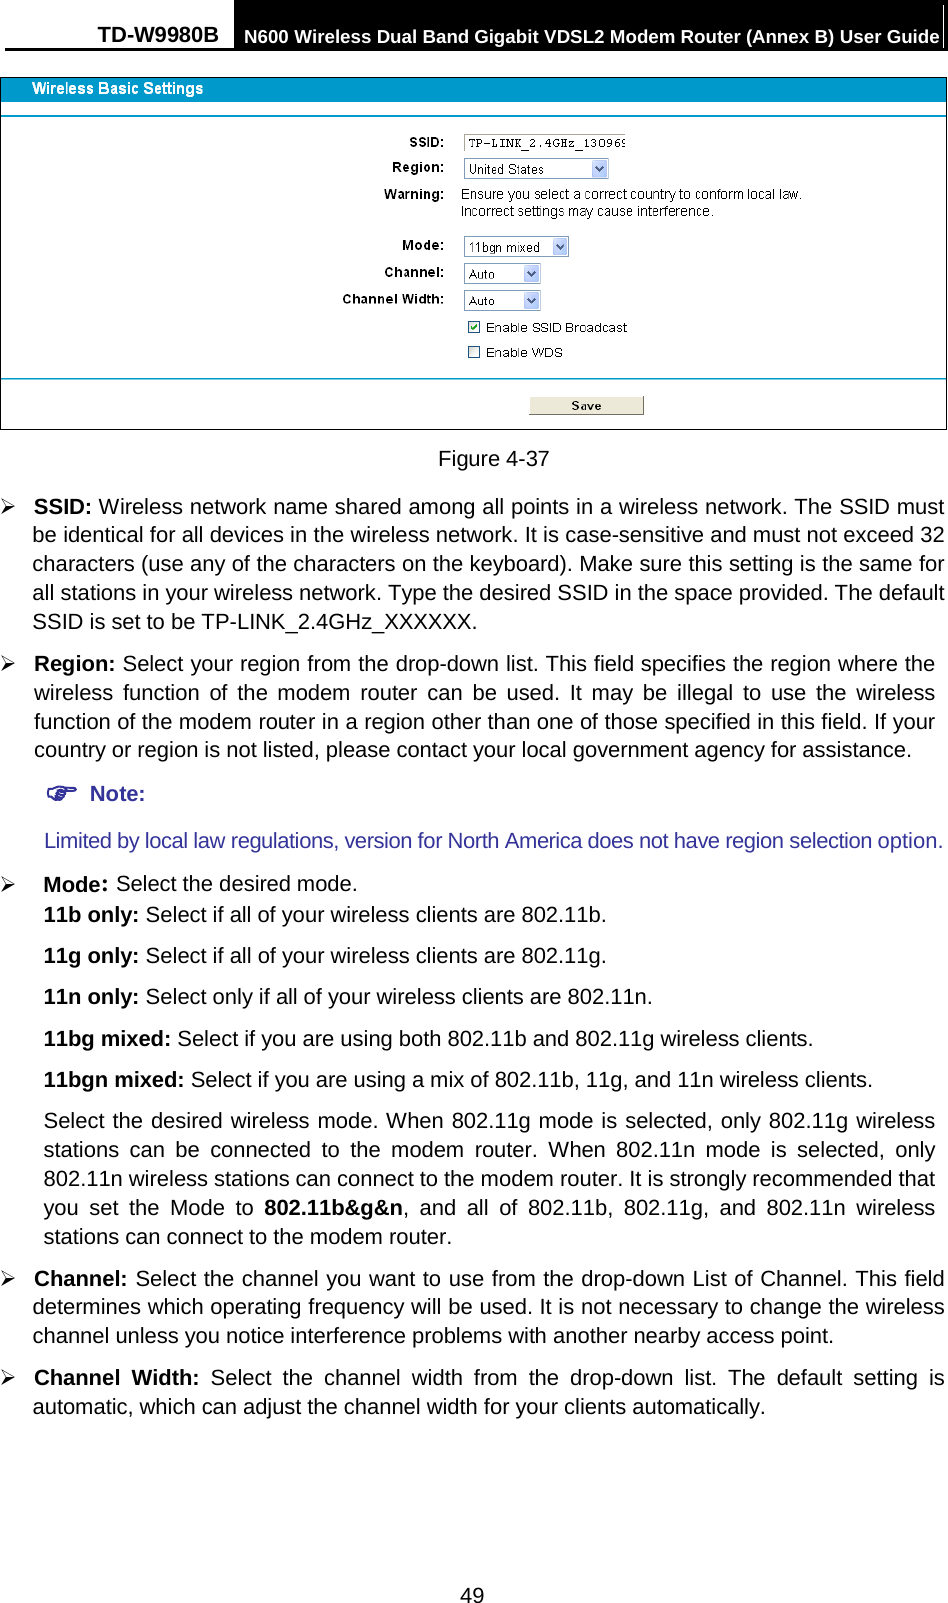 TD-W9980B N600 Wireless Dual Band Gigabit VDSL2 Modem Router (Annex B) User Guide   Figure 4-37    SSID: Wireless network name shared among all points in a wireless network. The SSID must be identical for all devices in the wireless network. It is case-sensitive and must not exceed 32 characters (use any of the characters on the keyboard). Make sure this setting is the same for all stations in your wireless network. Type the desired SSID in the space provided. The default SSID is set to be TP-LINK_2.4GHz_XXXXXX.  Region: Select your region from the drop-down list. This field specifies the region where the wireless function of the modem router can be used. It may be illegal to use the wireless function of the modem router in a region other than one of those specified in this field. If your country or region is not listed, please contact your local government agency for assistance.  Note: Limited by local law regulations, version for North America does not have region selection option.  Mode: Select the desired mode.   11b only: Select if all of your wireless clients are 802.11b. 11g only: Select if all of your wireless clients are 802.11g. 11n only: Select only if all of your wireless clients are 802.11n. 11bg mixed: Select if you are using both 802.11b and 802.11g wireless clients. 11bgn mixed: Select if you are using a mix of 802.11b, 11g, and 11n wireless clients. Select the desired wireless mode. When 802.11g mode is selected, only 802.11g wireless stations  can be connected to the modem router. When 802.11n mode is selected, only 802.11n wireless stations can connect to the modem router. It is strongly recommended that you set the Mode to 802.11b&amp;g&amp;n, and all of 802.11b, 802.11g, and 802.11n wireless stations can connect to the modem router.  Channel: Select the channel you want to use from the drop-down List of Channel. This field determines which operating frequency will be used. It is not necessary to change the wireless channel unless you notice interference problems with another nearby access point.  Channel Width:  Select  the channel width from the drop-down list.  The default setting is automatic, which can adjust the channel width for your clients automatically.   49 